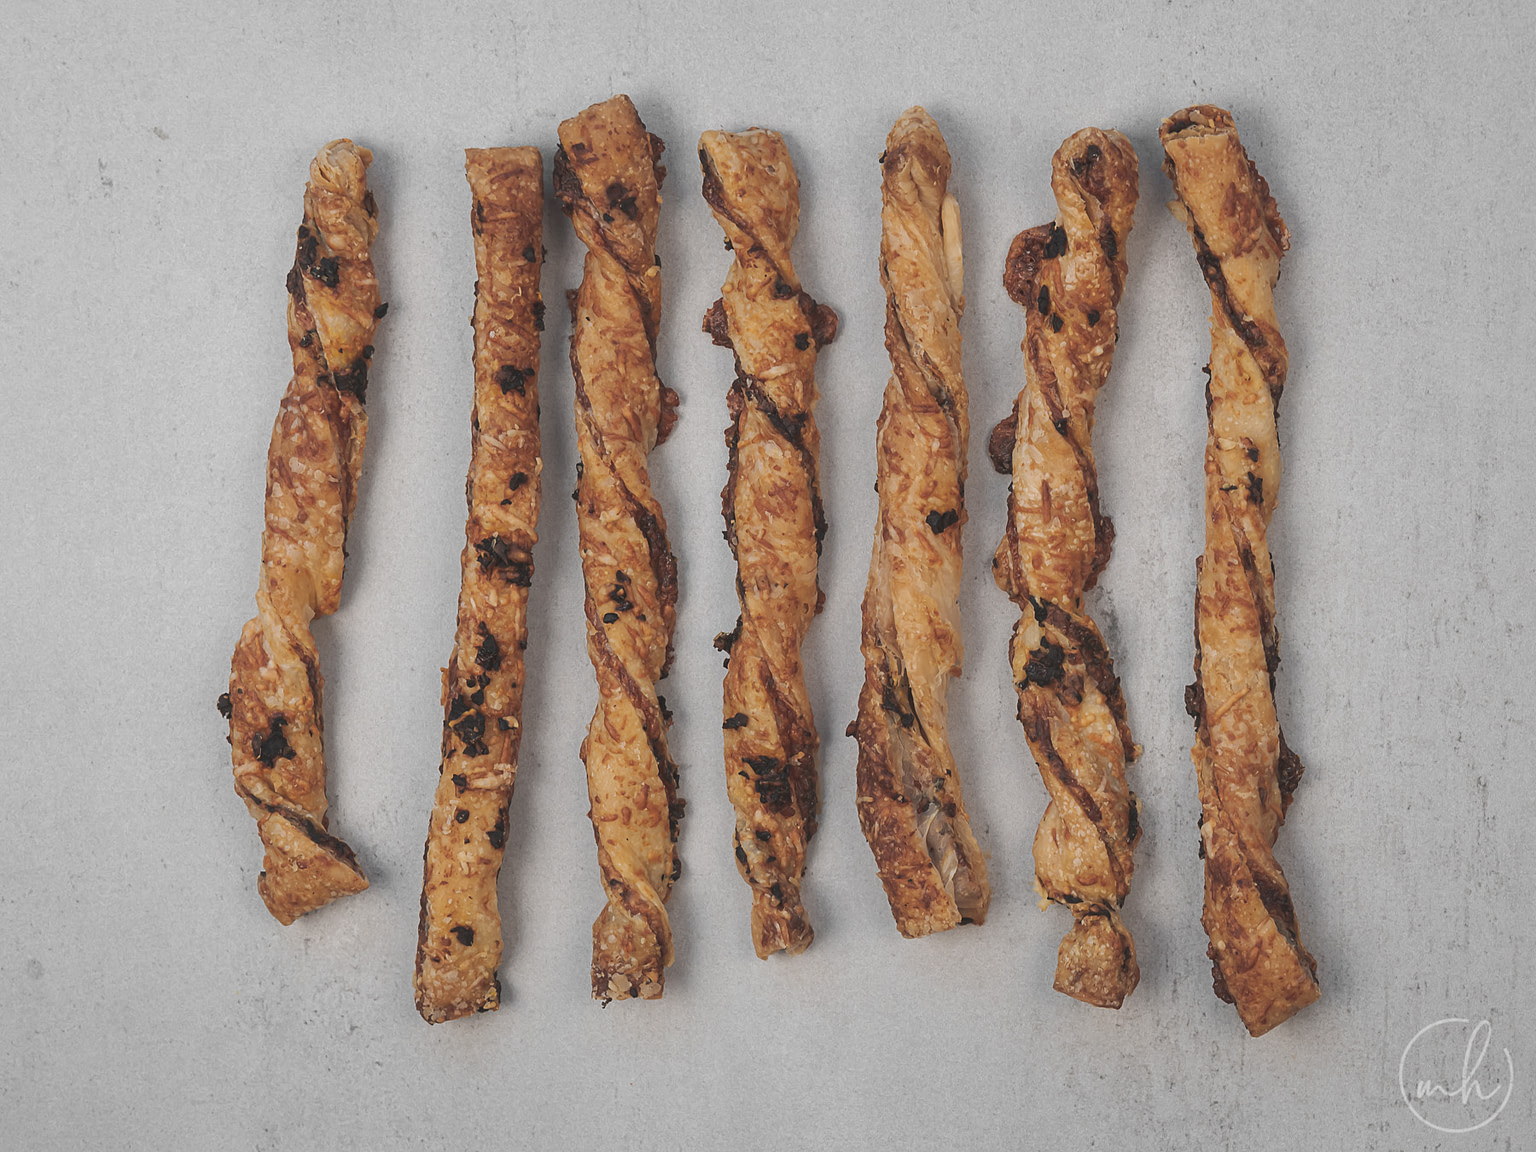 Sundried tomatoes and olive puff pastry cheese straws placed on a grey surface.